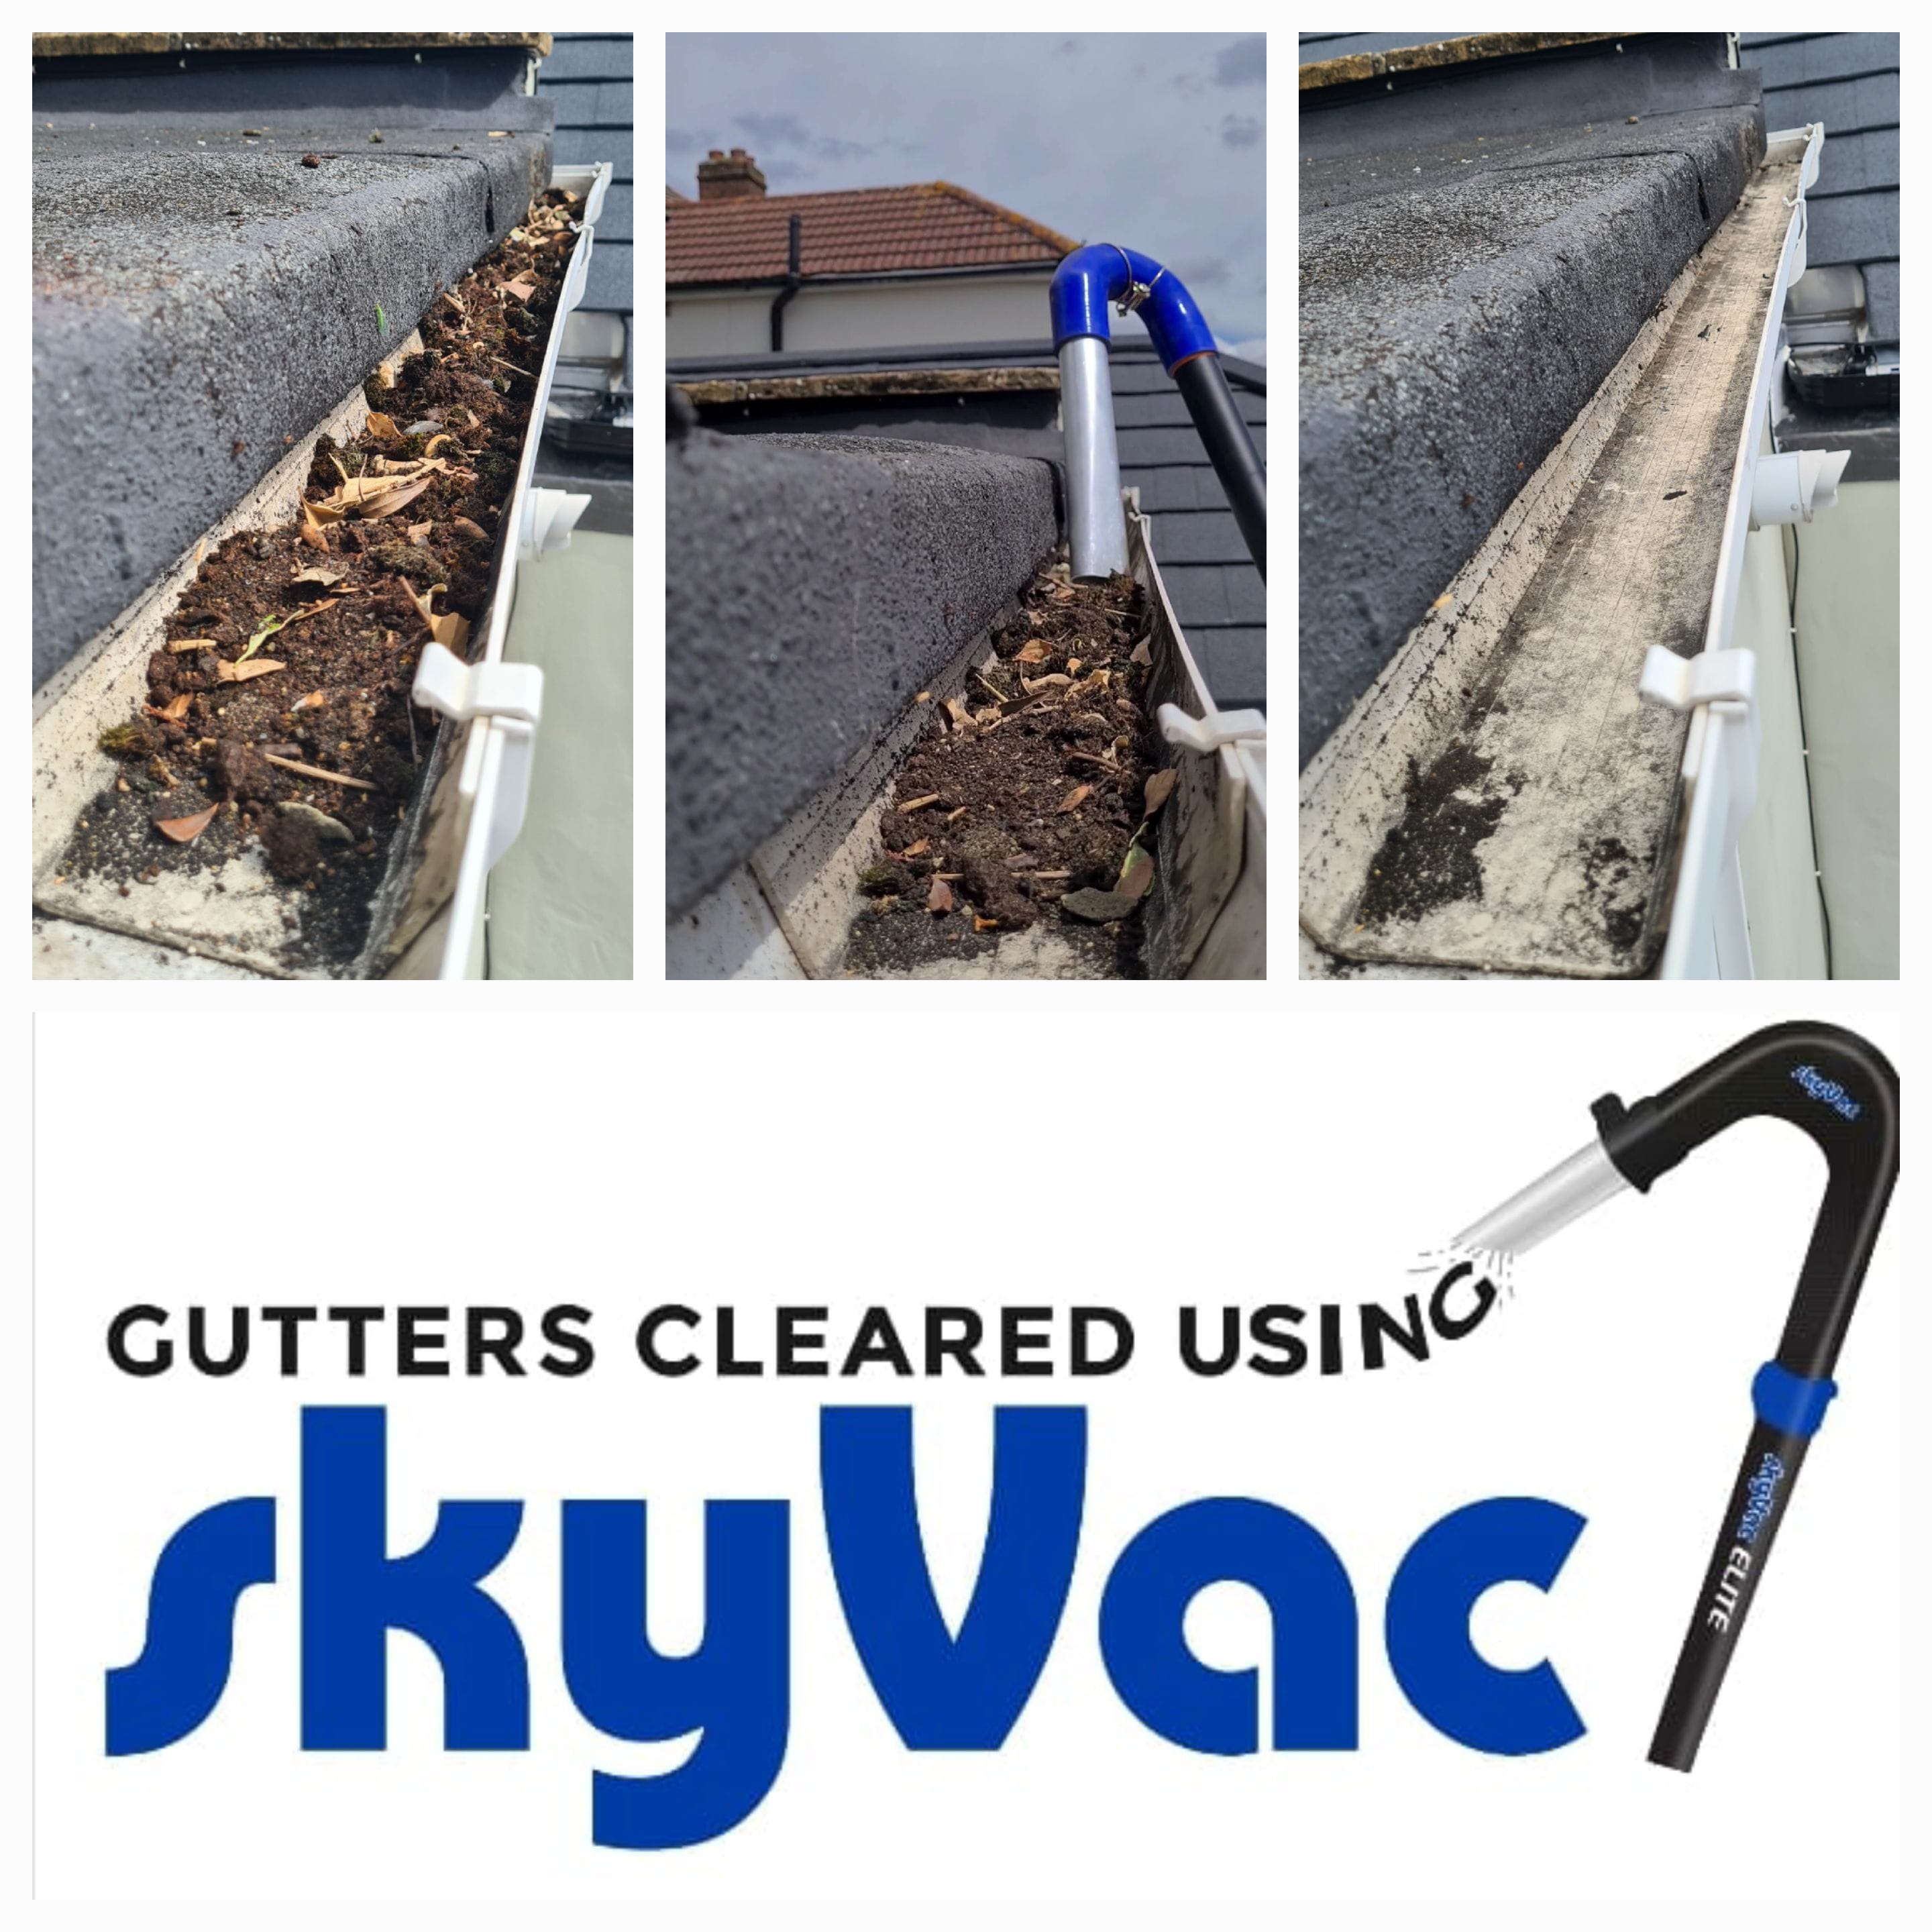 skyvac before and after images